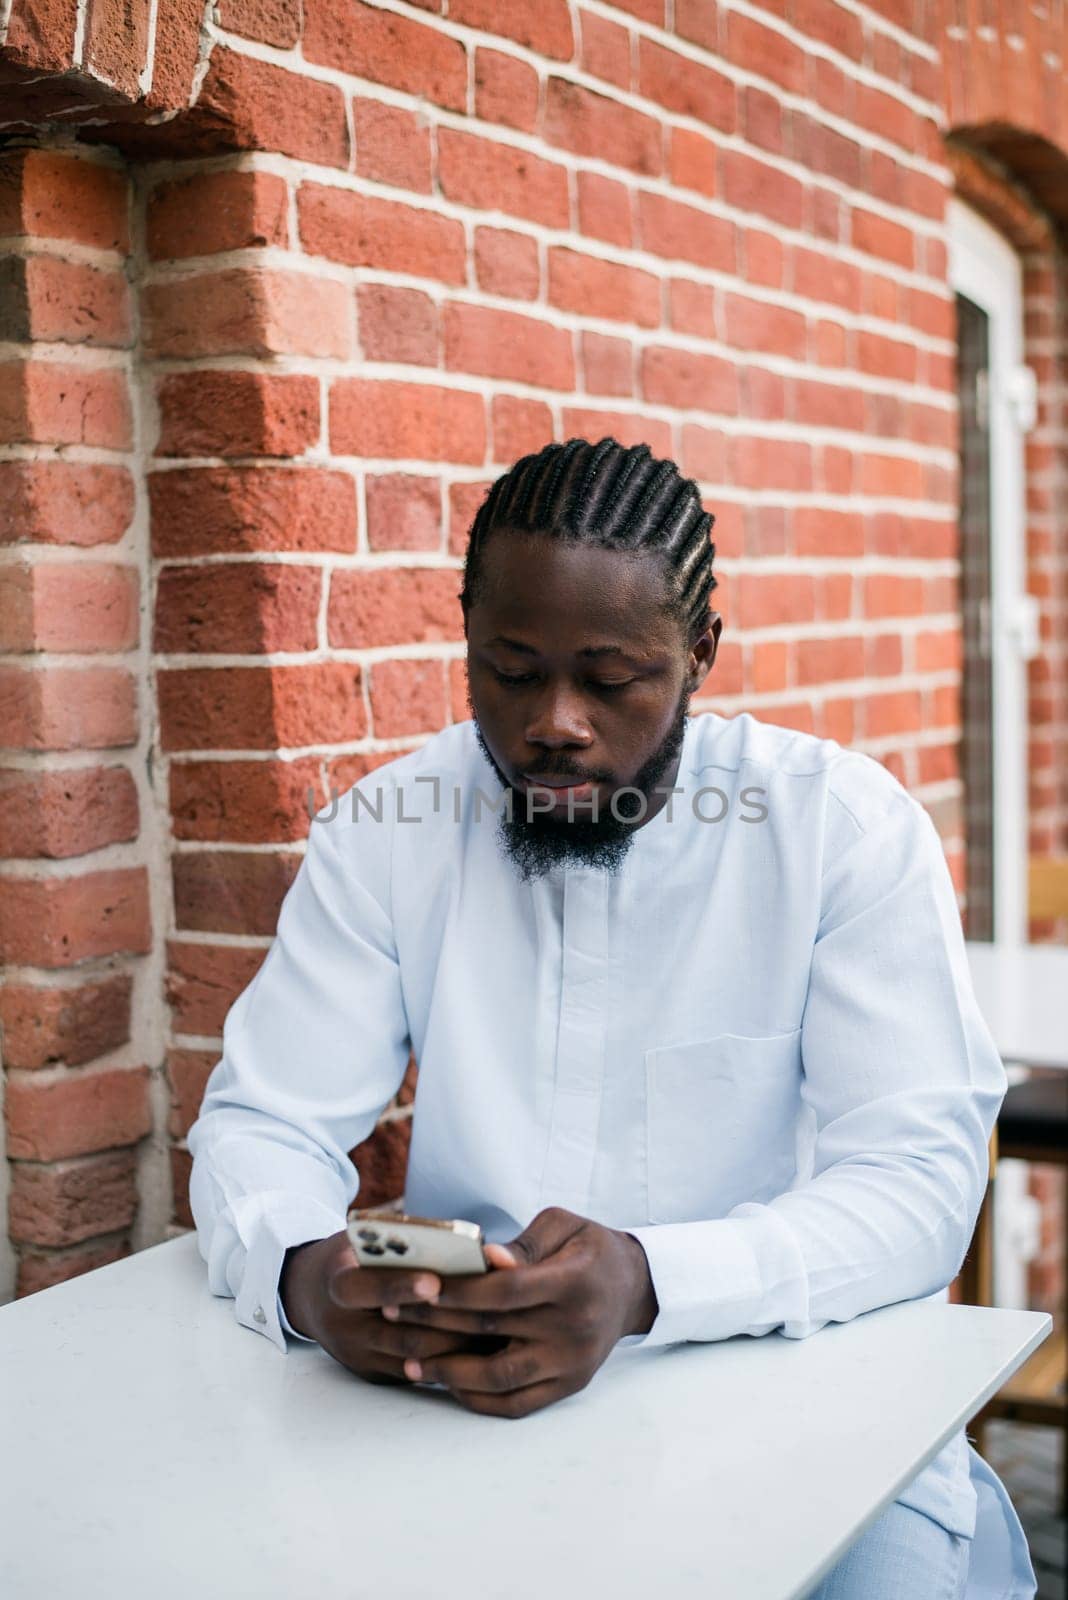 African american man checks cell phone in the street cafe in summer day. Millennial generation and gen z people. Social networks and dating app concept by Satura86